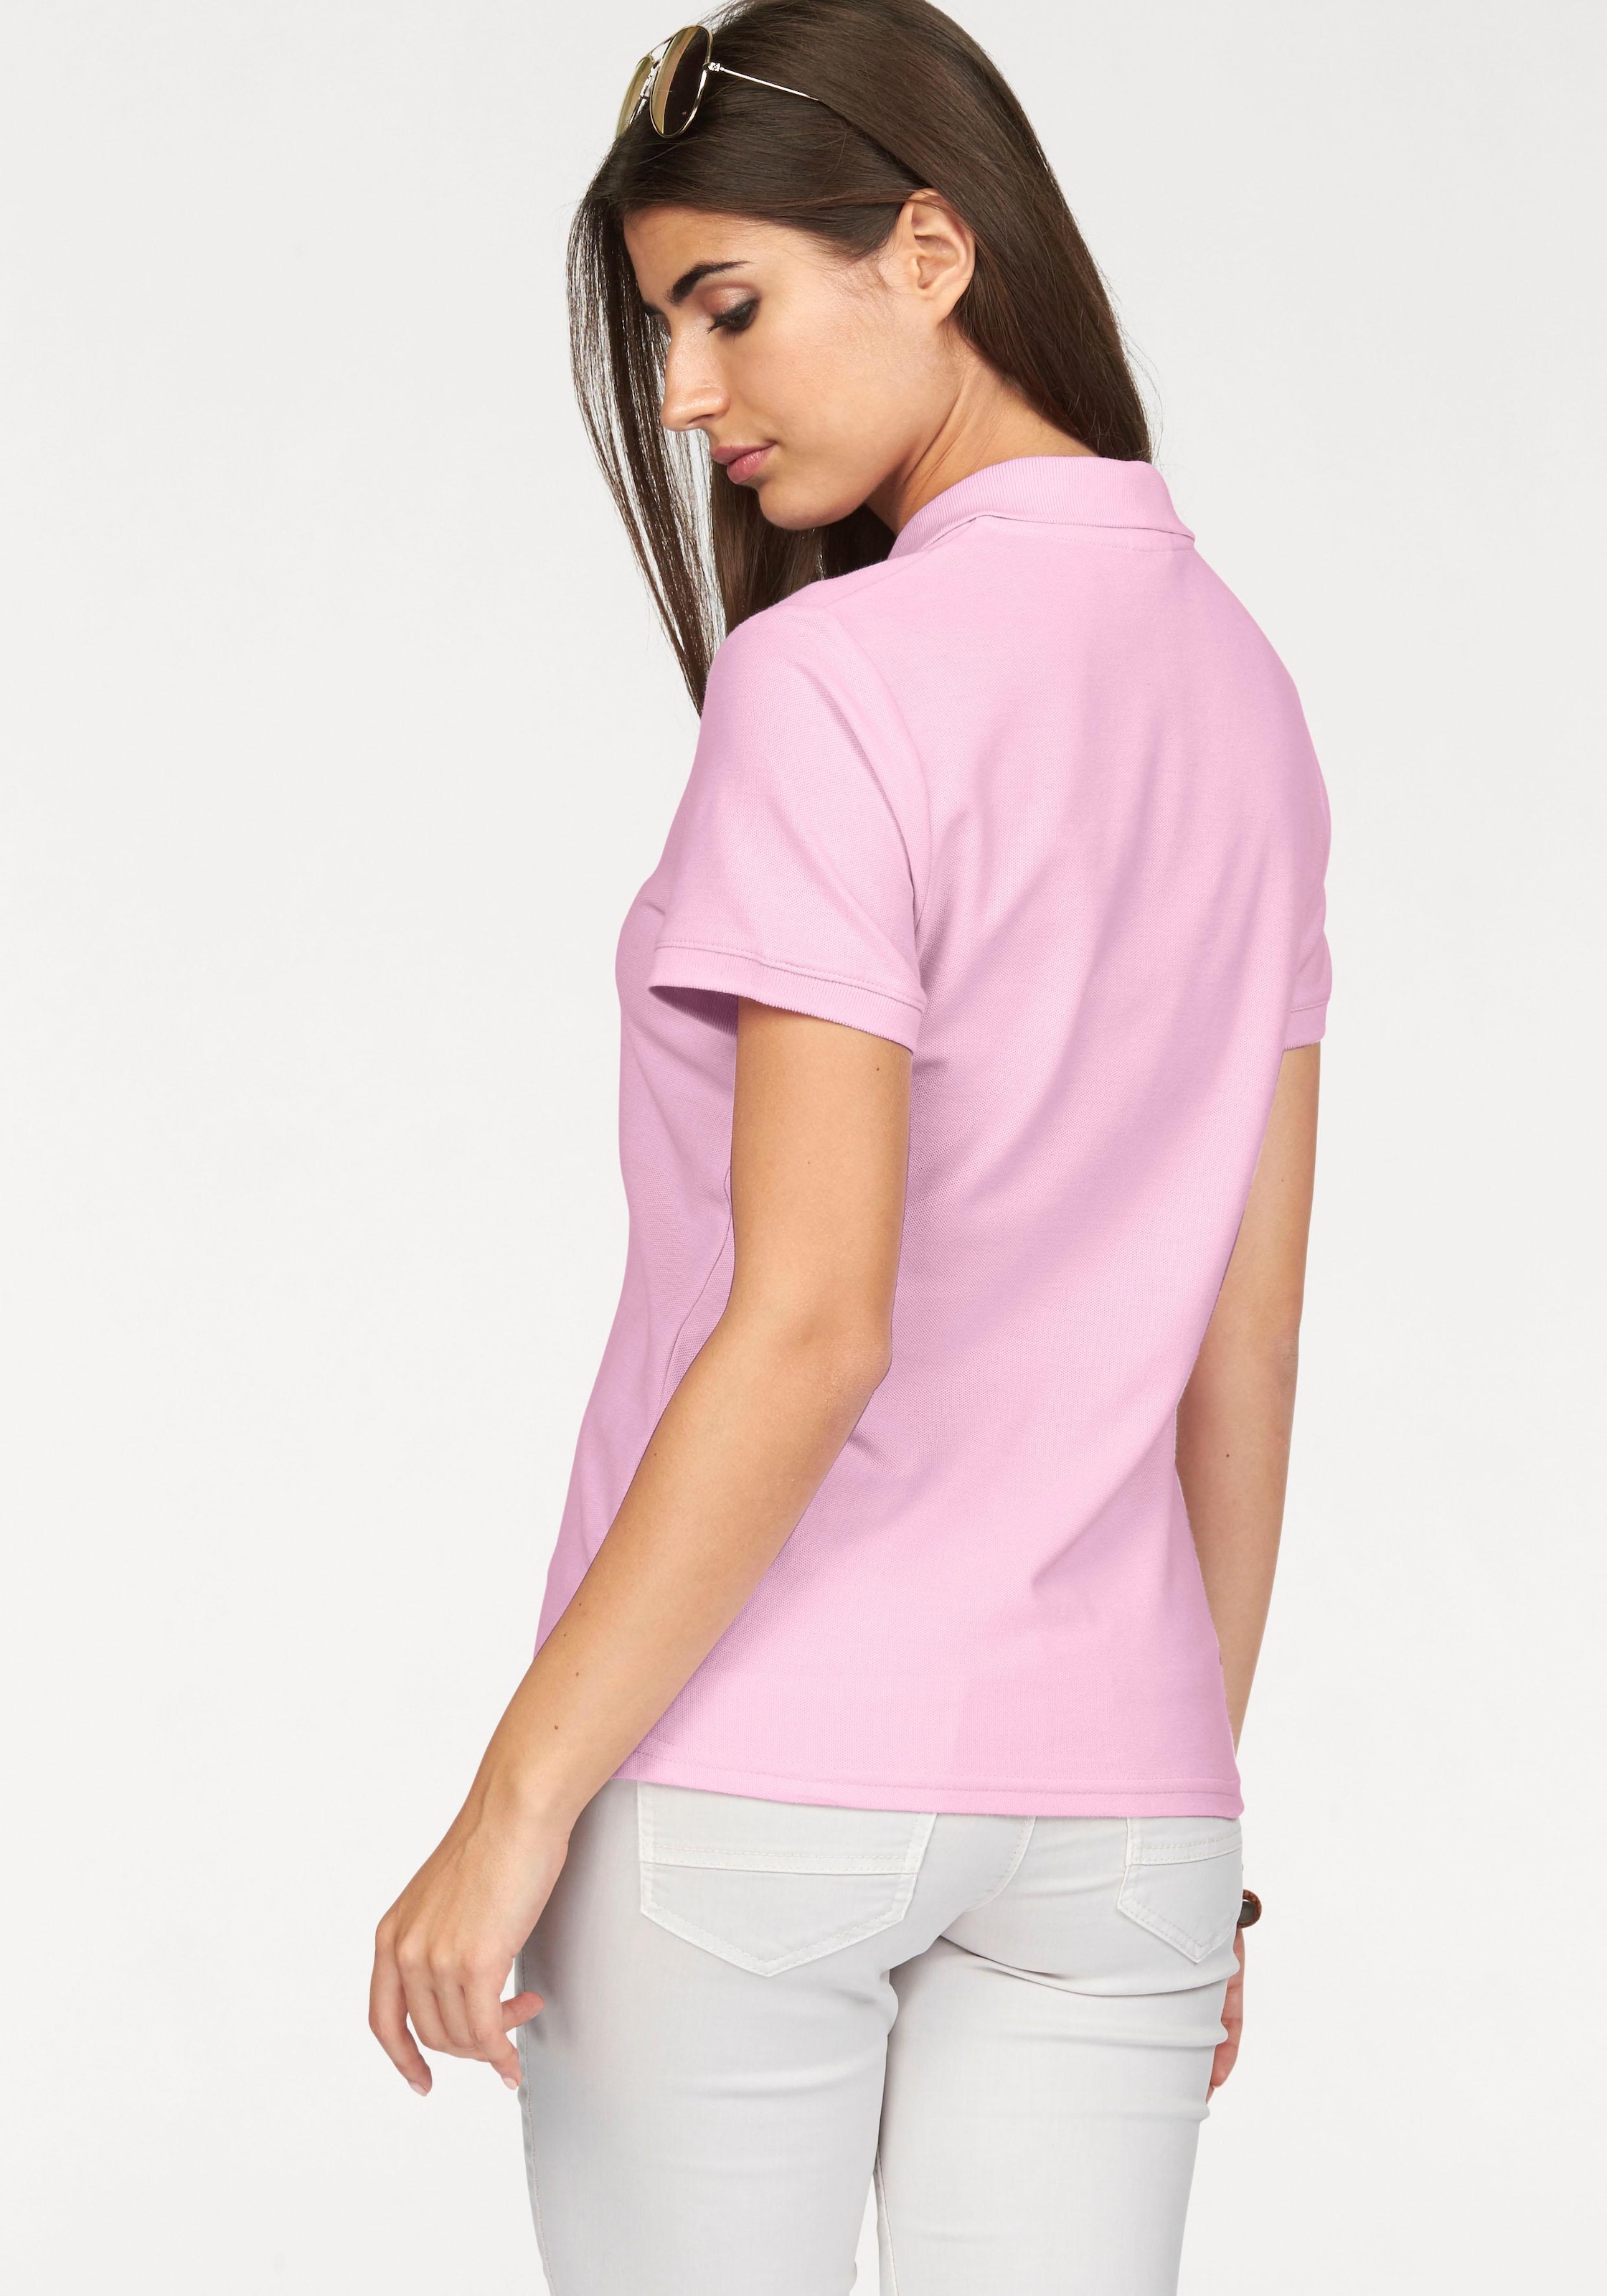 Poloshirt Polo« »Lady-Fit Premium Fruit online of OTTO Loom the bei